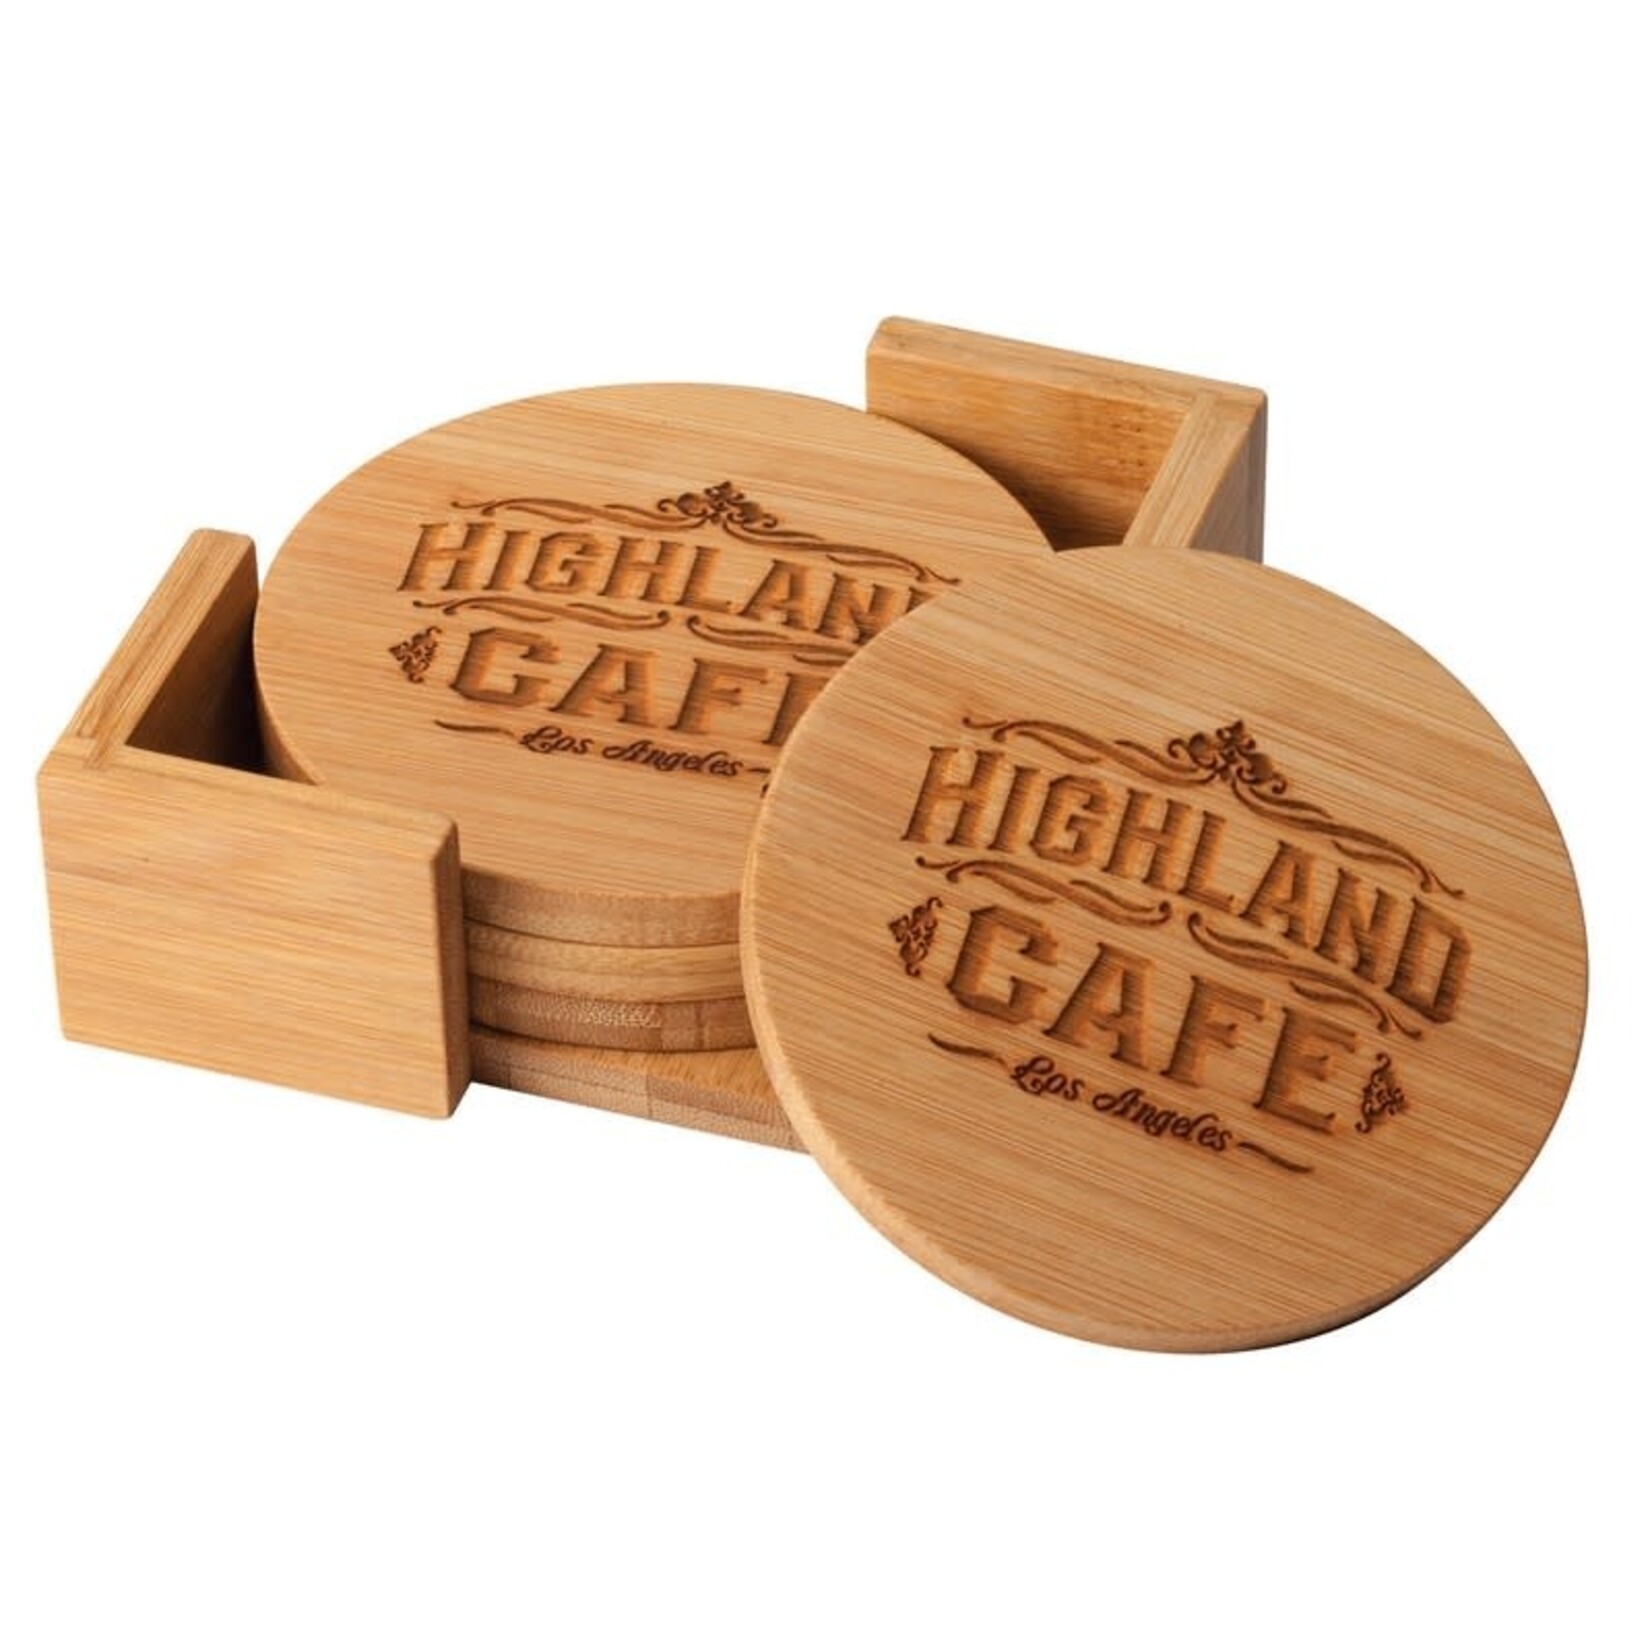 Marco BAM15 Round wooden Coaster Set includes engraving on coasters